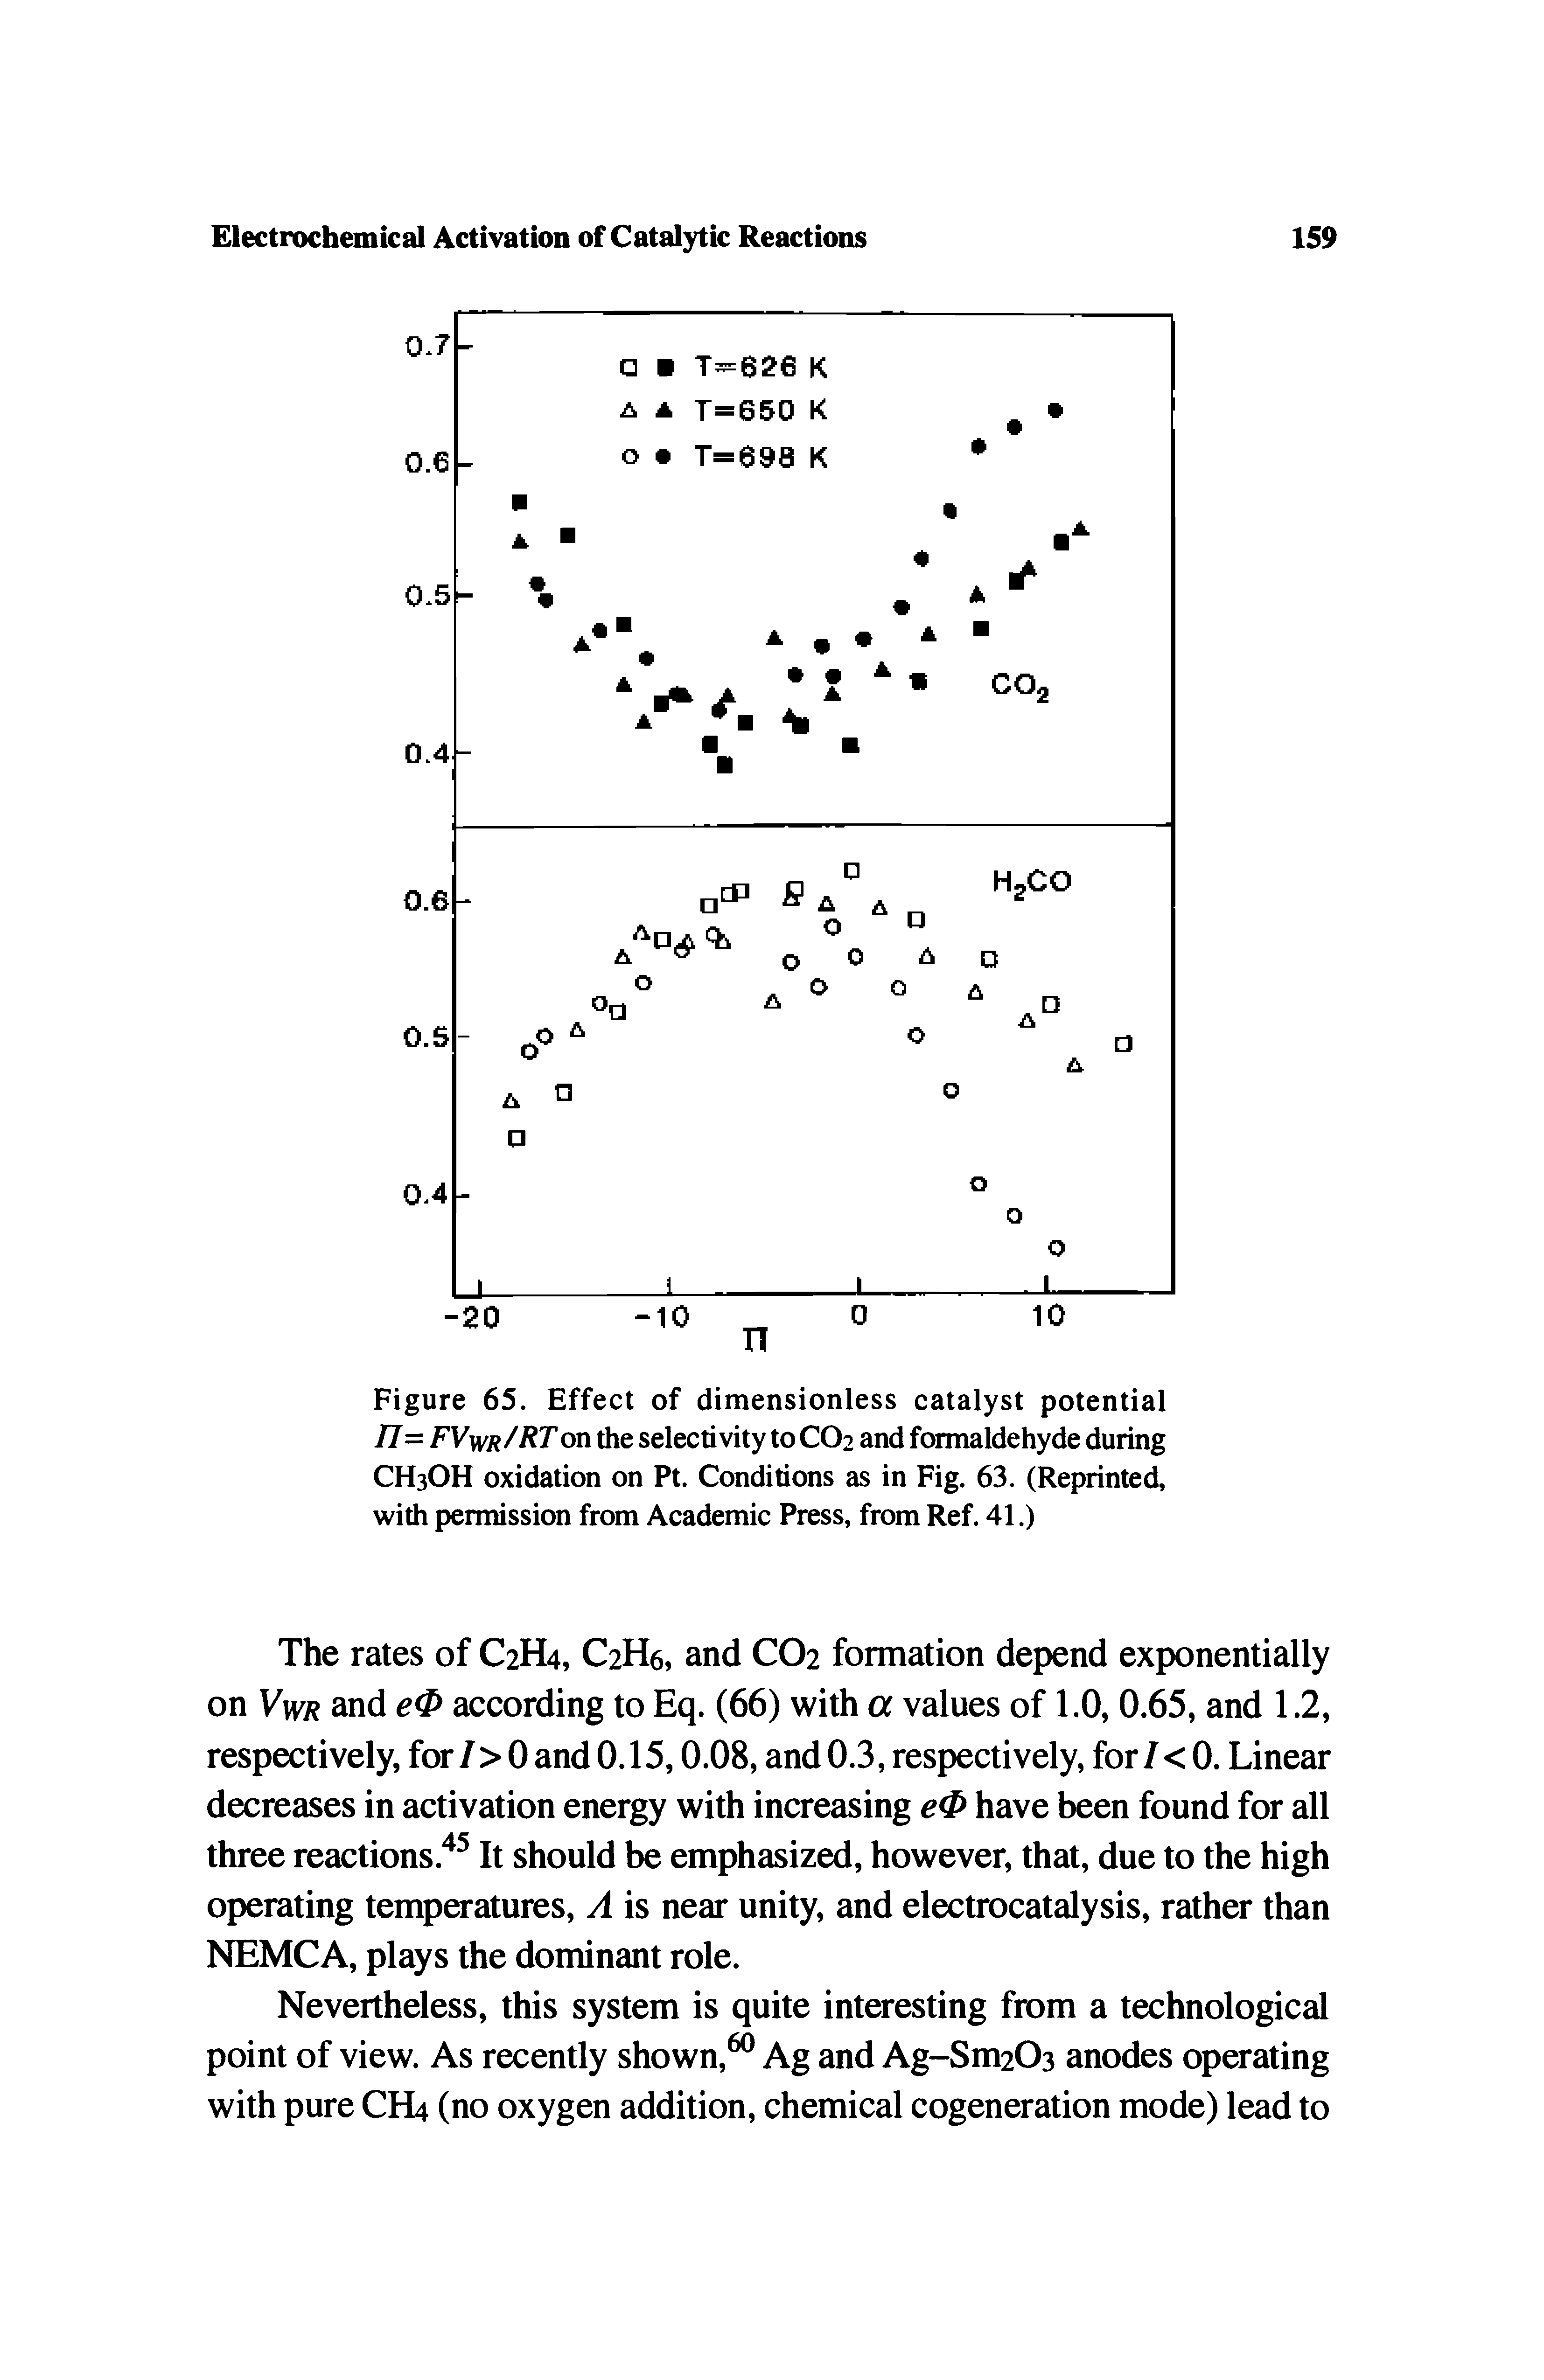 Figure 65. Effect of dimensionless catalyst potential 77= FVwr/RTon the selectivity to CO2 and formaldehyde during CH3OH oxidation on Pt. Conditions as in Fig. 63. (Reprinted, with permission from Academic Press, from Ref. 41.)...